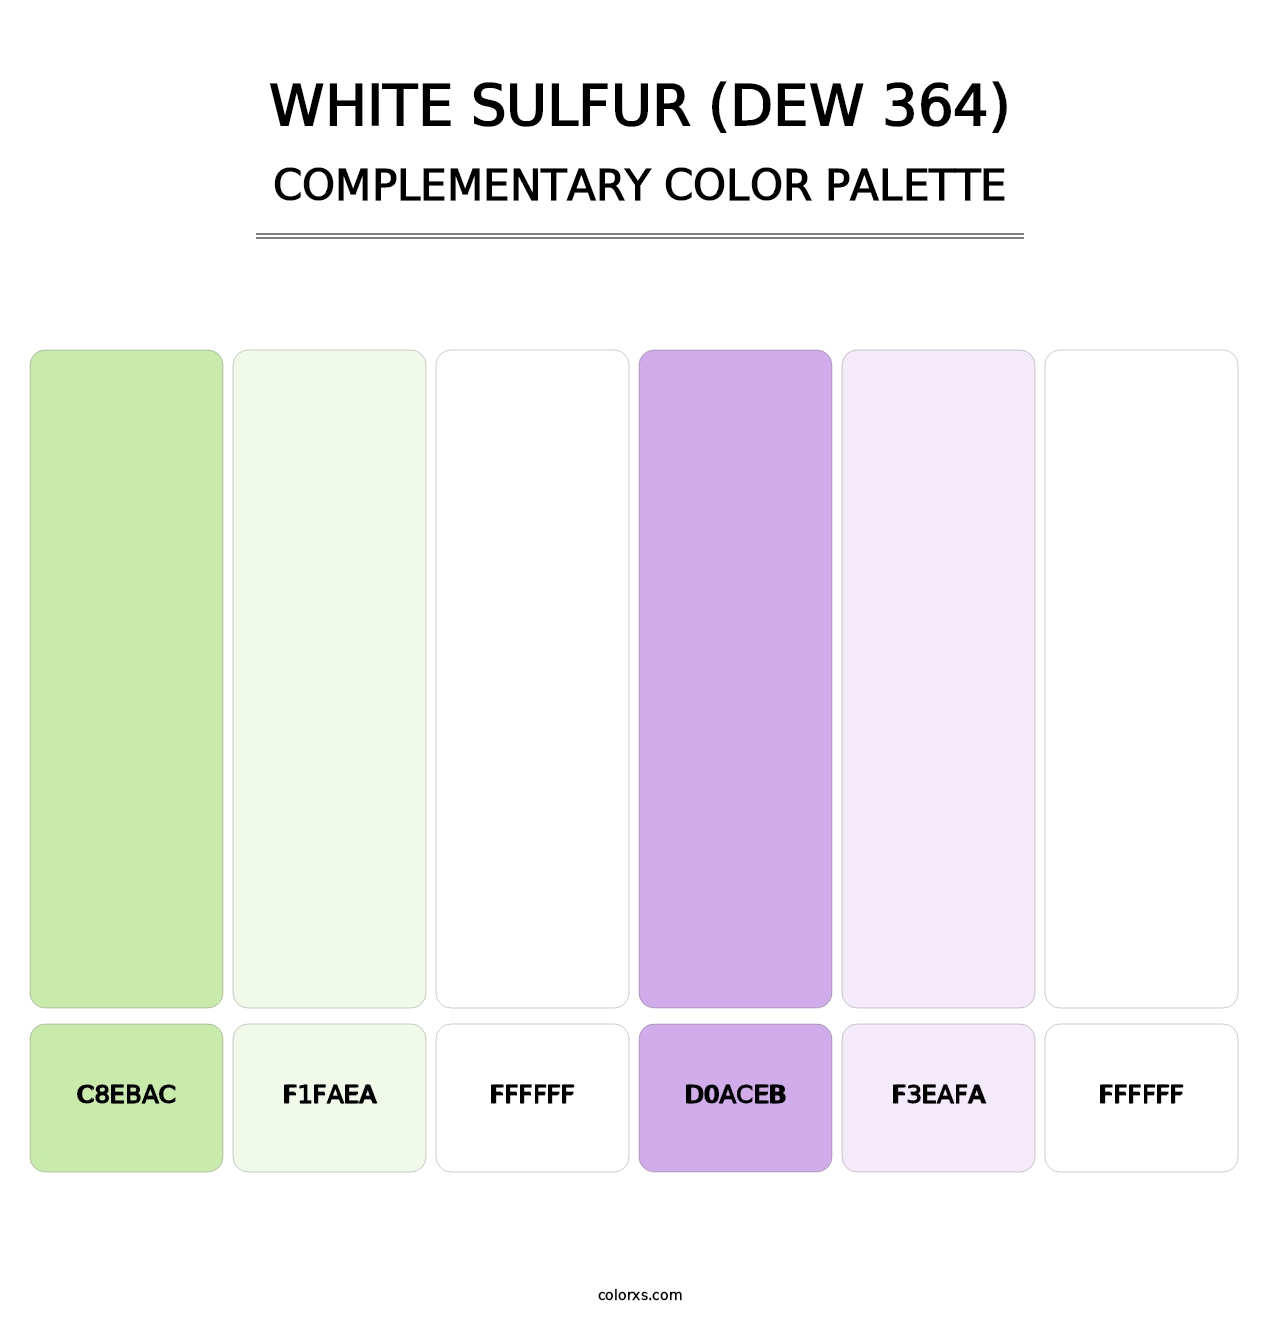 White Sulfur (DEW 364) - Complementary Color Palette